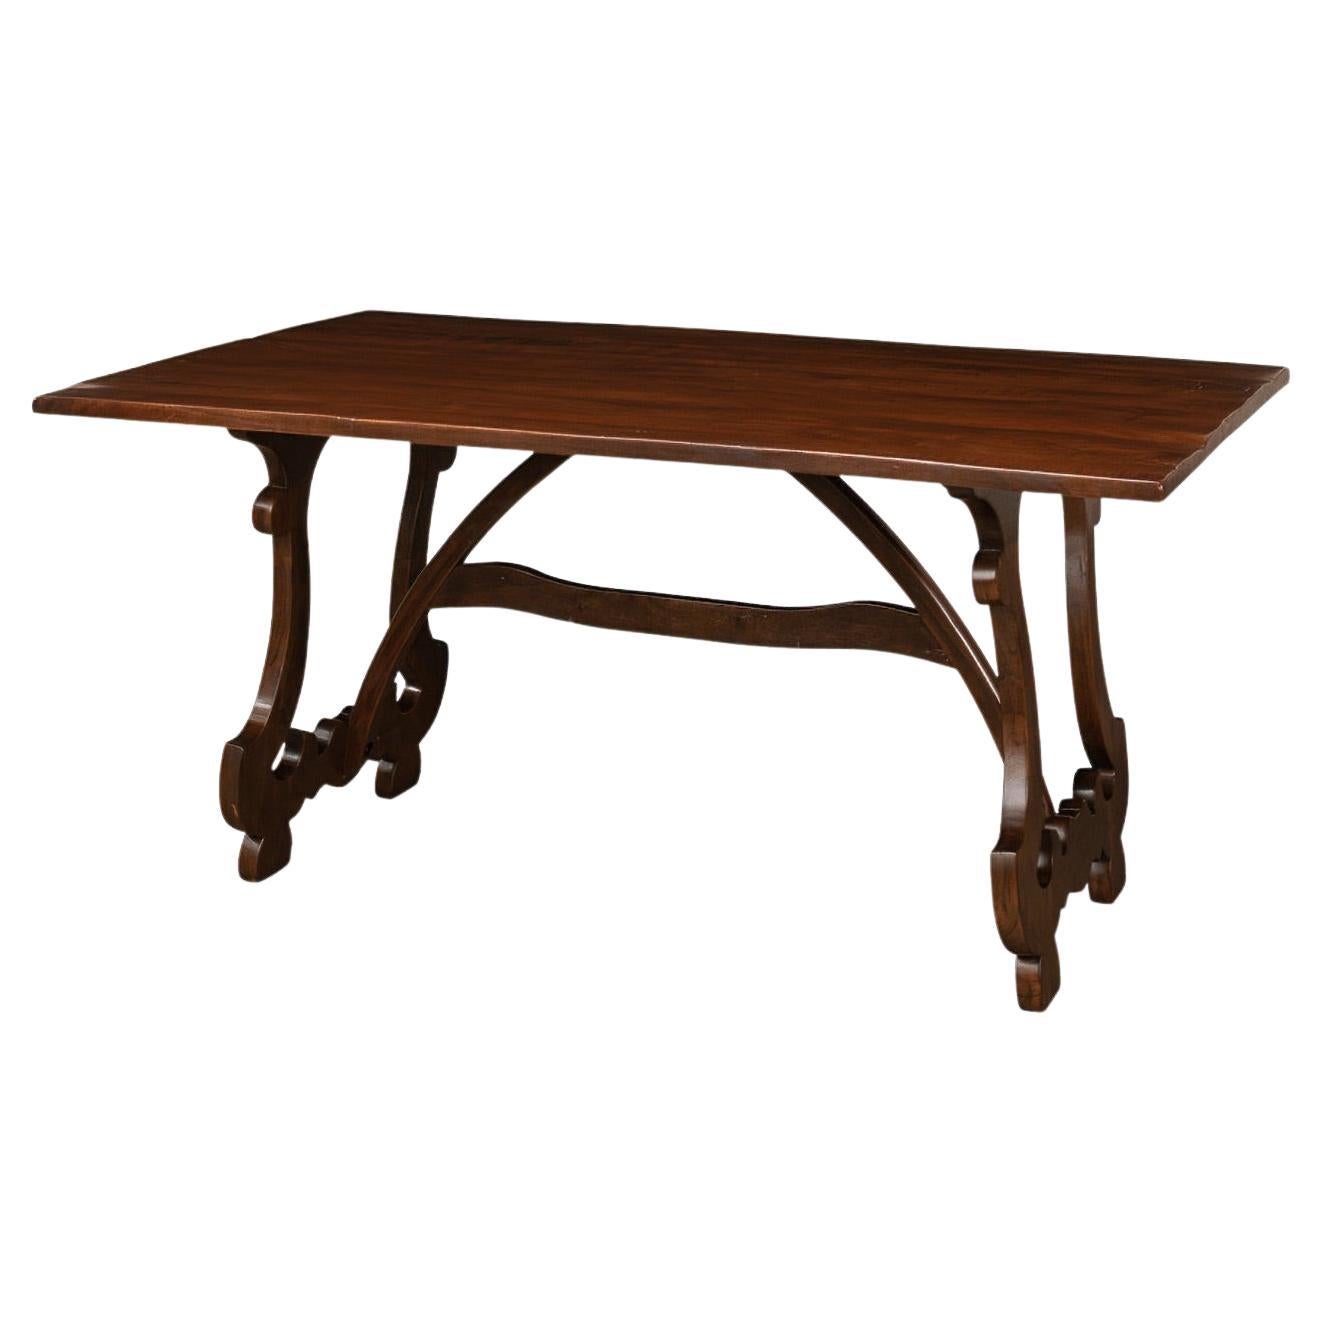 European Country Style Dining Table For Sale